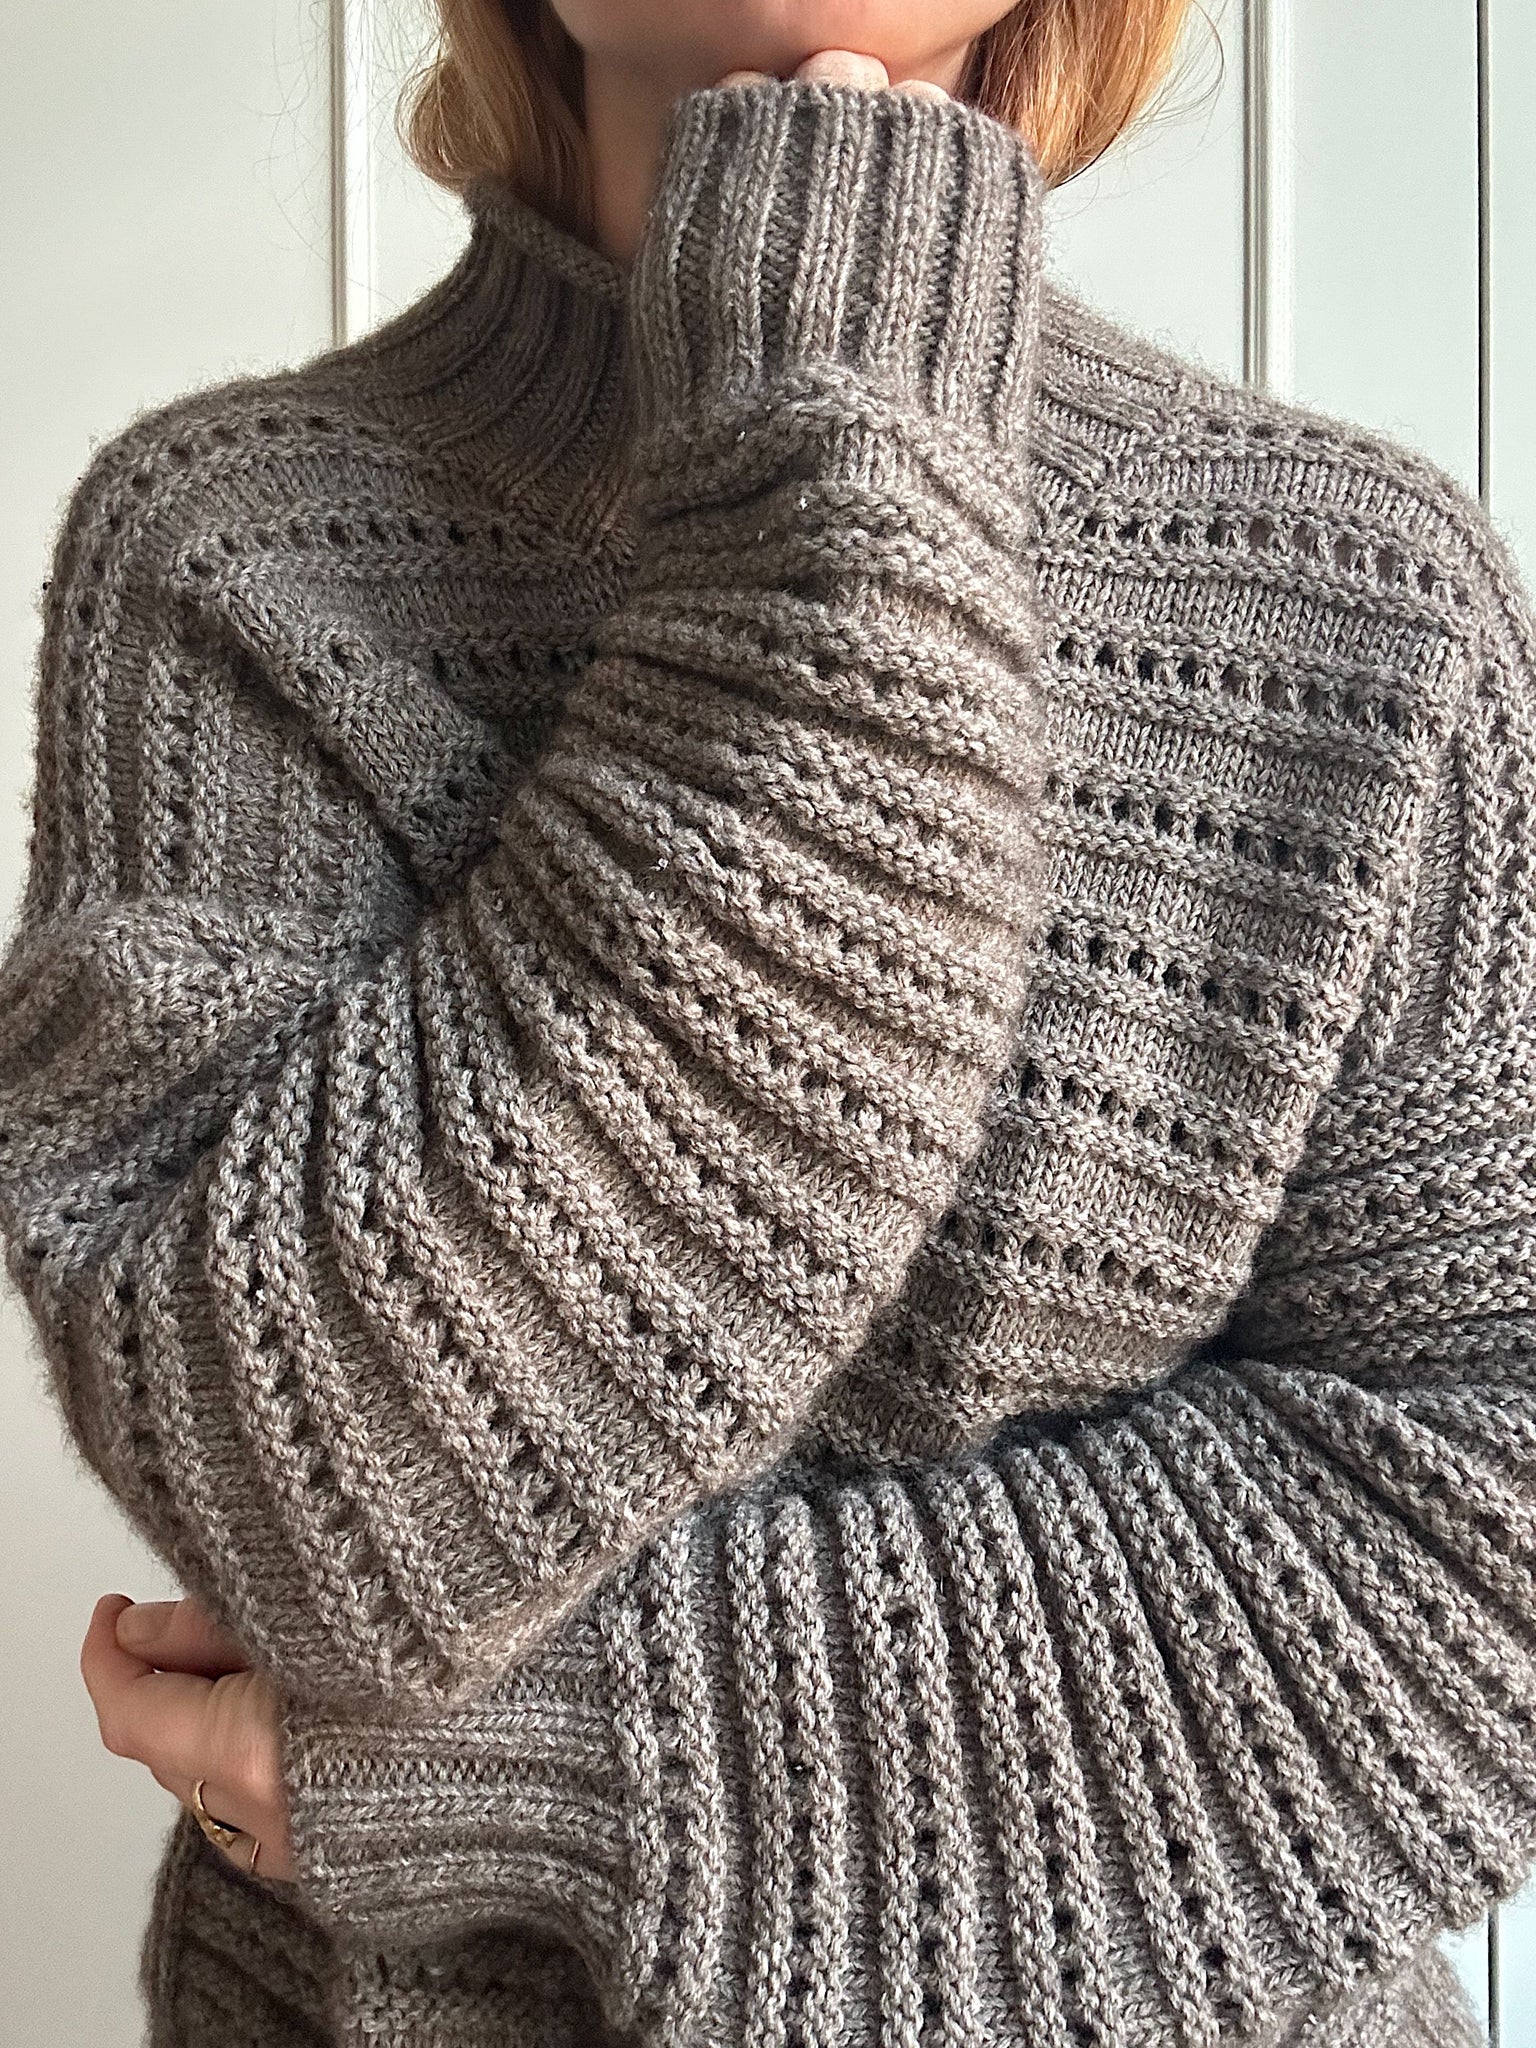 Sweater No. 27 - Knitting Pattern in English – • MY FAVOURITE THINGS ...